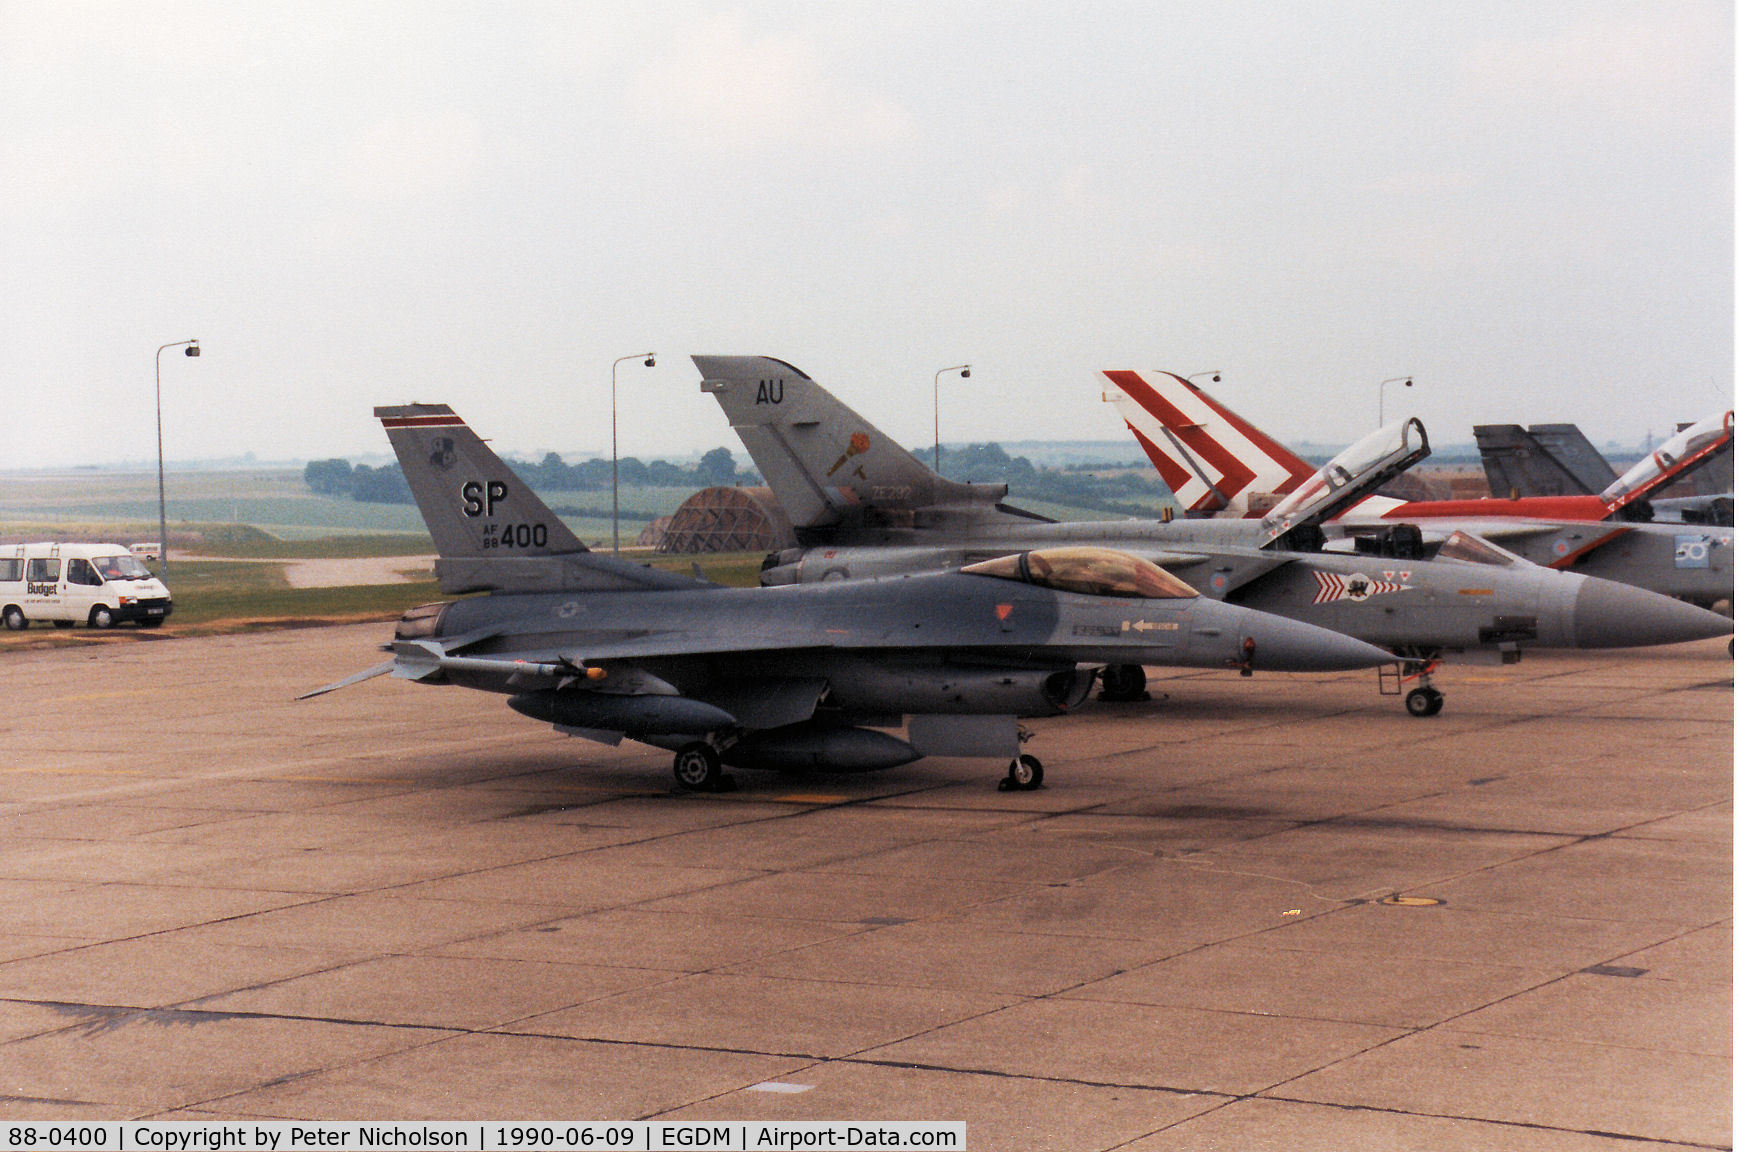 88-0400, 1988 General Dynamics F-16C Fighting Falcon C/N 5C-614, F-16C Falcon of Spangdahlem's 480th Tactical Fighter Squadron/52nd Tactical Fighter Wing on the flight-line at the 1990 Boscombe Down Battle of Britain 50th Anniversary Airshow.